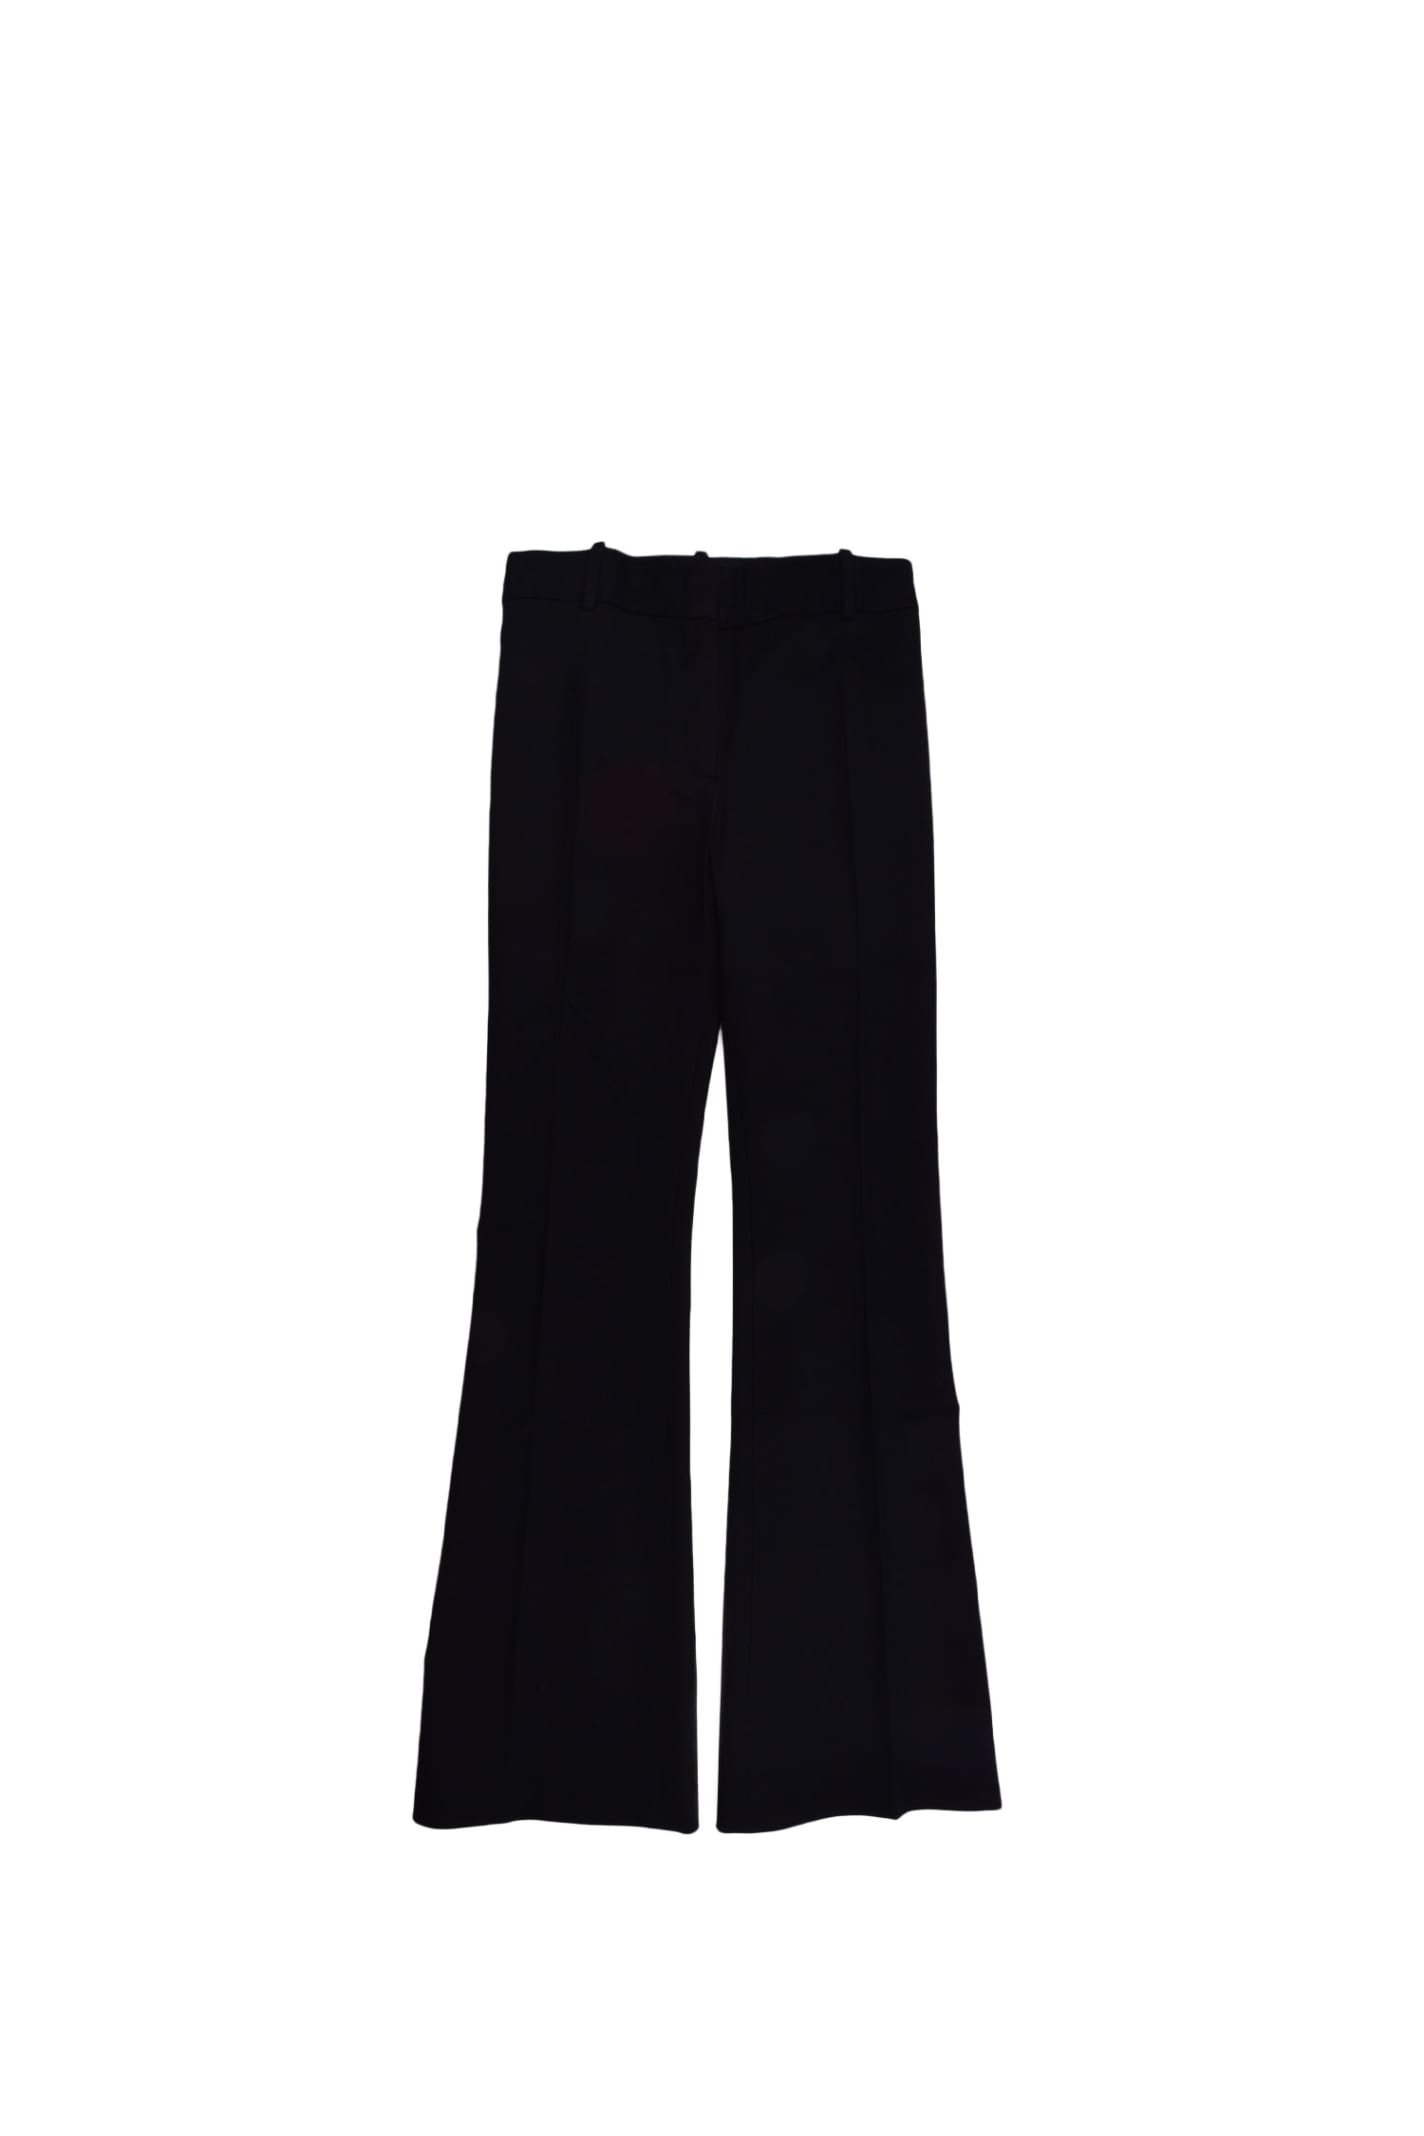 FRAME FLARED TROUSERS